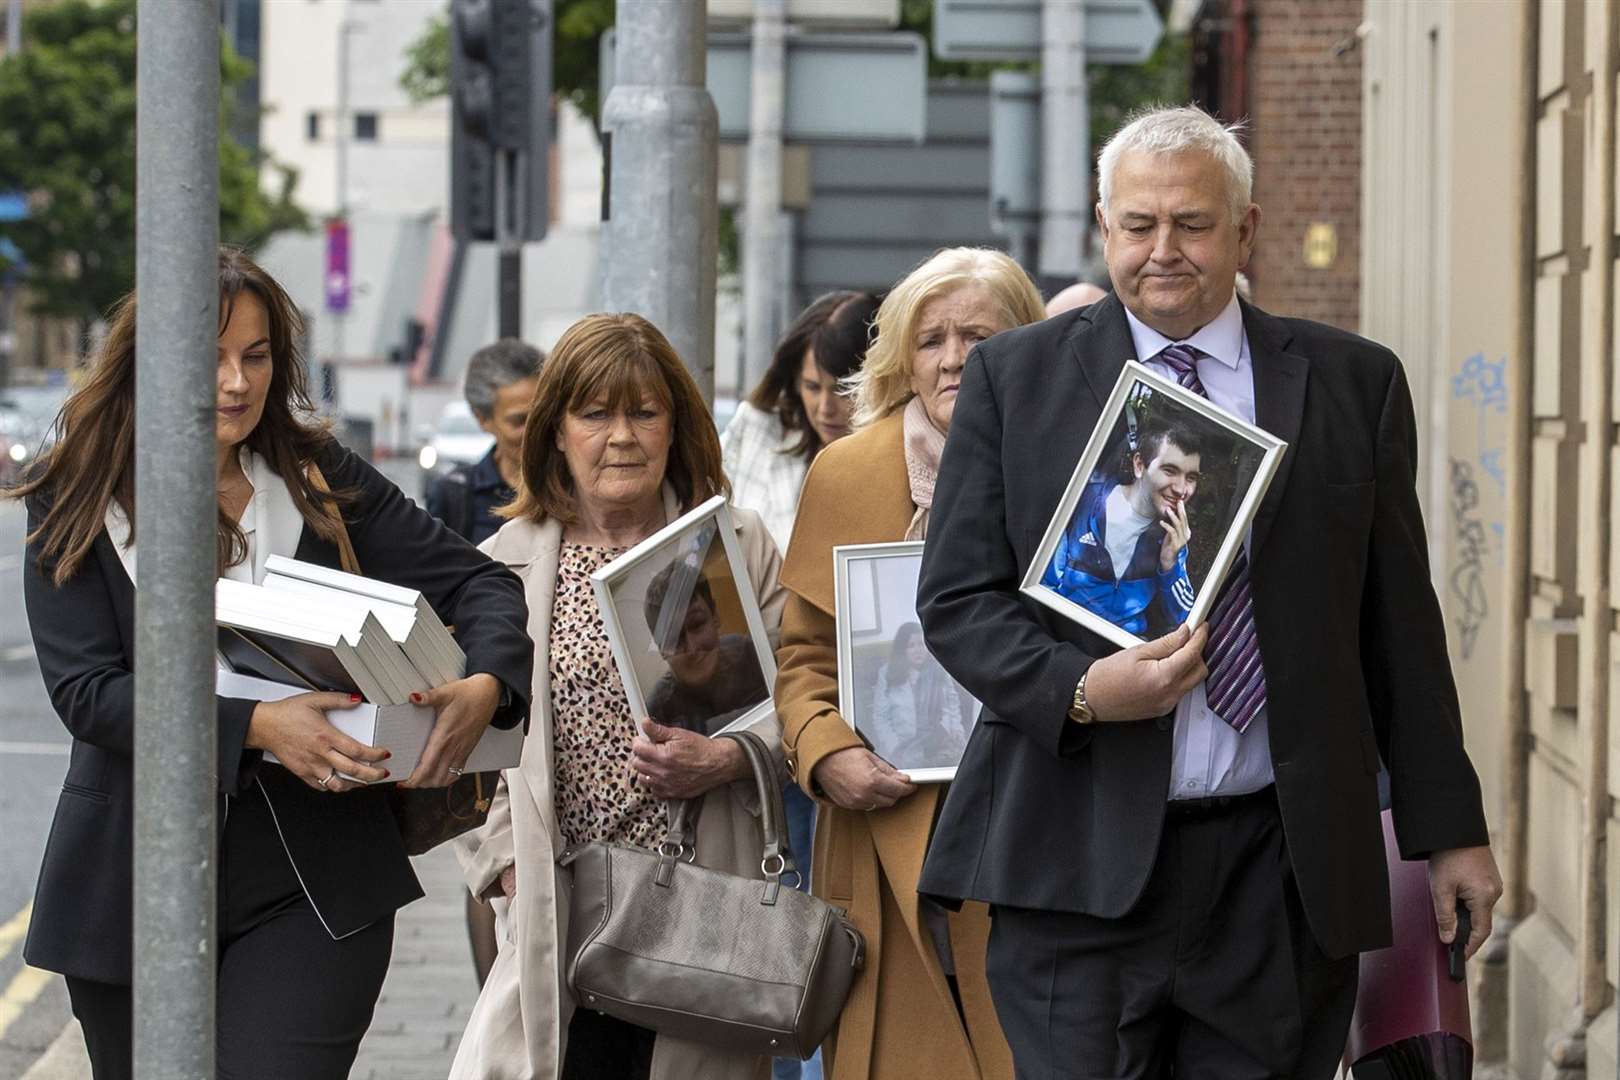 Family and supporters of patients of Muckamore Abbey Hospital outside the Corn Exchange, Cathedral Quarter in Belfast, as the first day of public hearings in the Muckamore Abbey Hospital Inquiry is under way (Liam McBurney/PA)